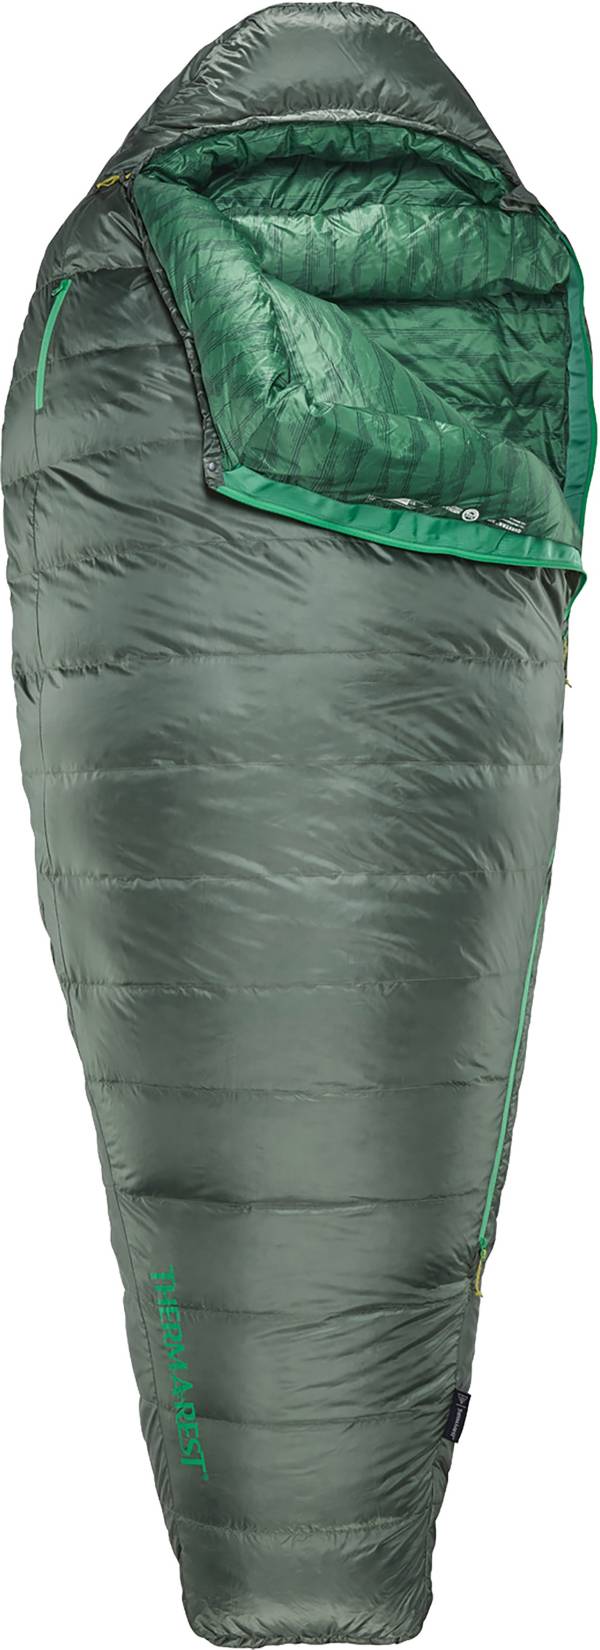 Therm-a-Rest Questar 32 Sleeping Bag product image